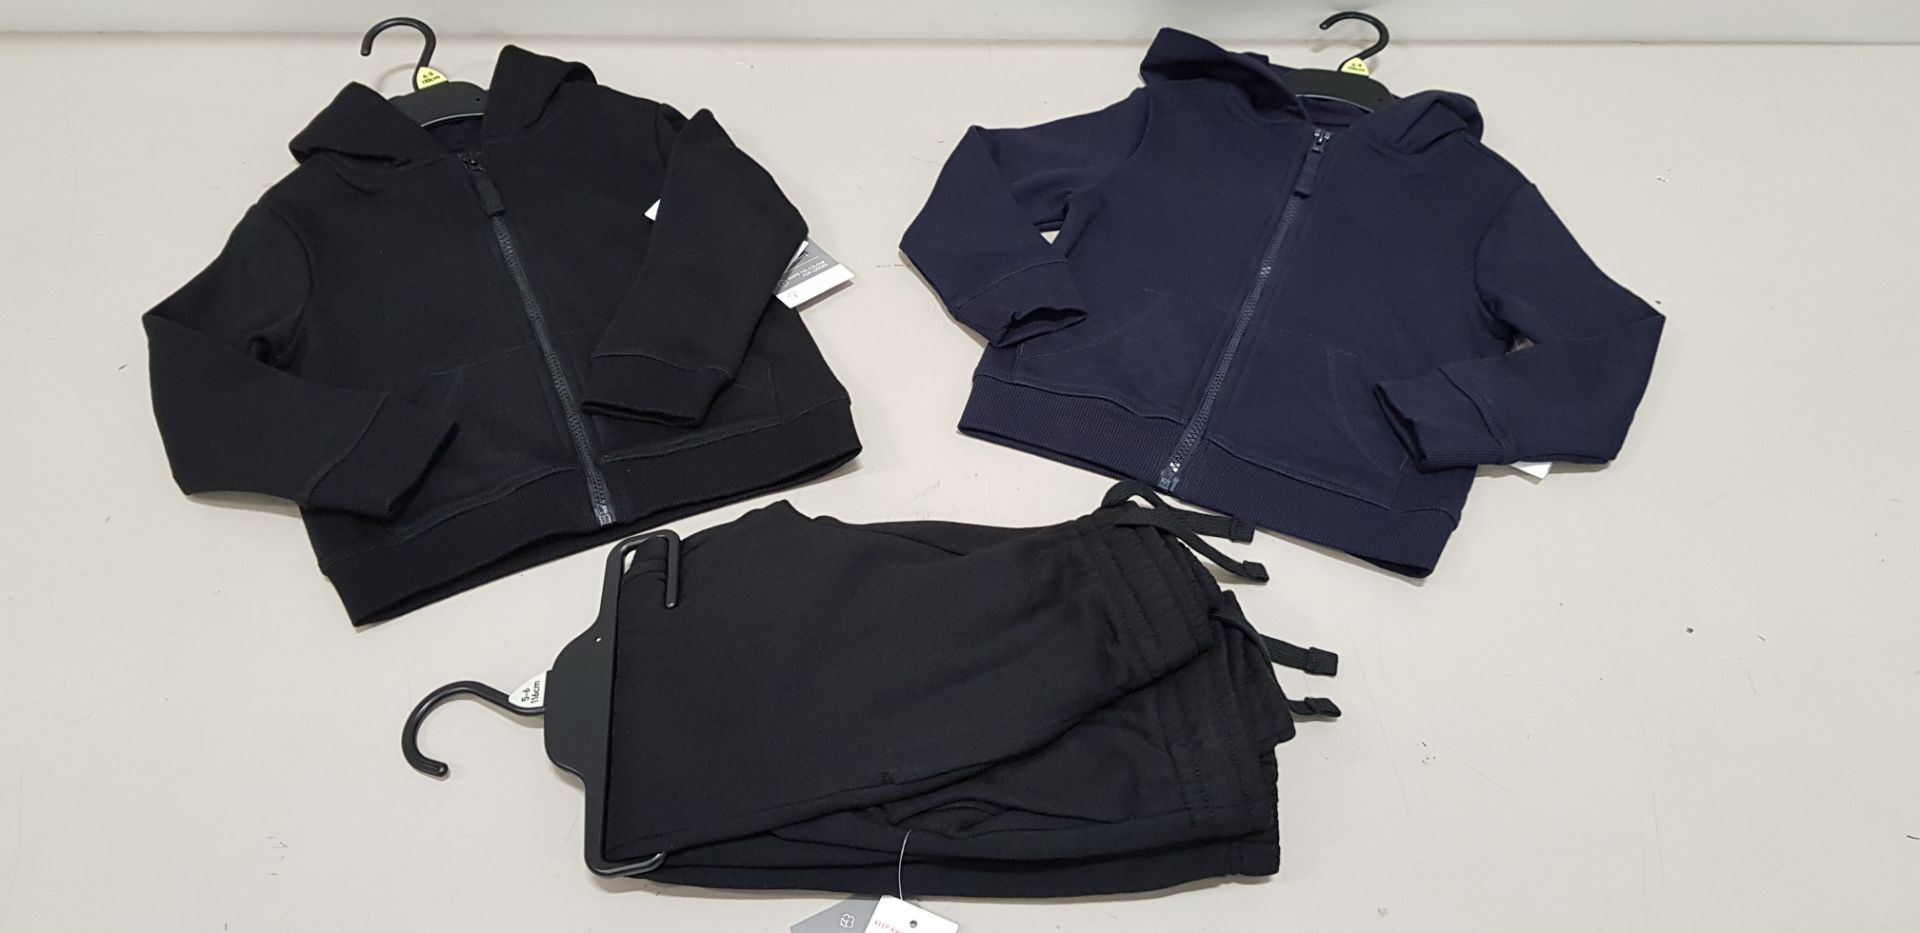 100+ PIECE MIXED F&F LOT CONTAINING 80 X BRAND NEW BOYS BLACK AND NAVY ZIP UP HOODIES ALL 4-5 YRS (